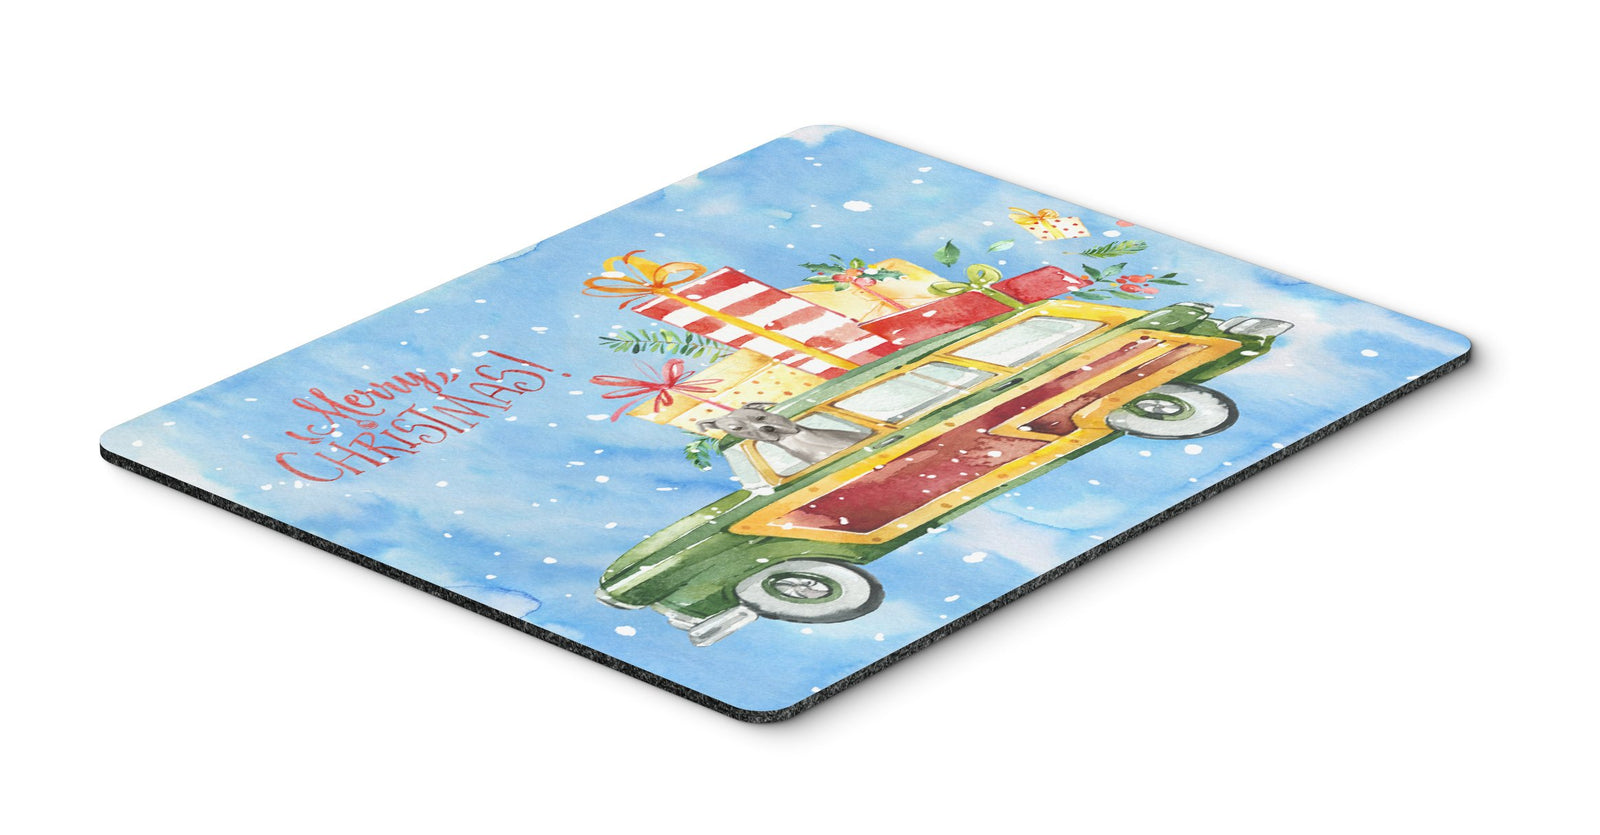 Merry Christmas Staffordshire Bull Terrier Mouse Pad, Hot Pad or Trivet CK2432MP by Caroline's Treasures